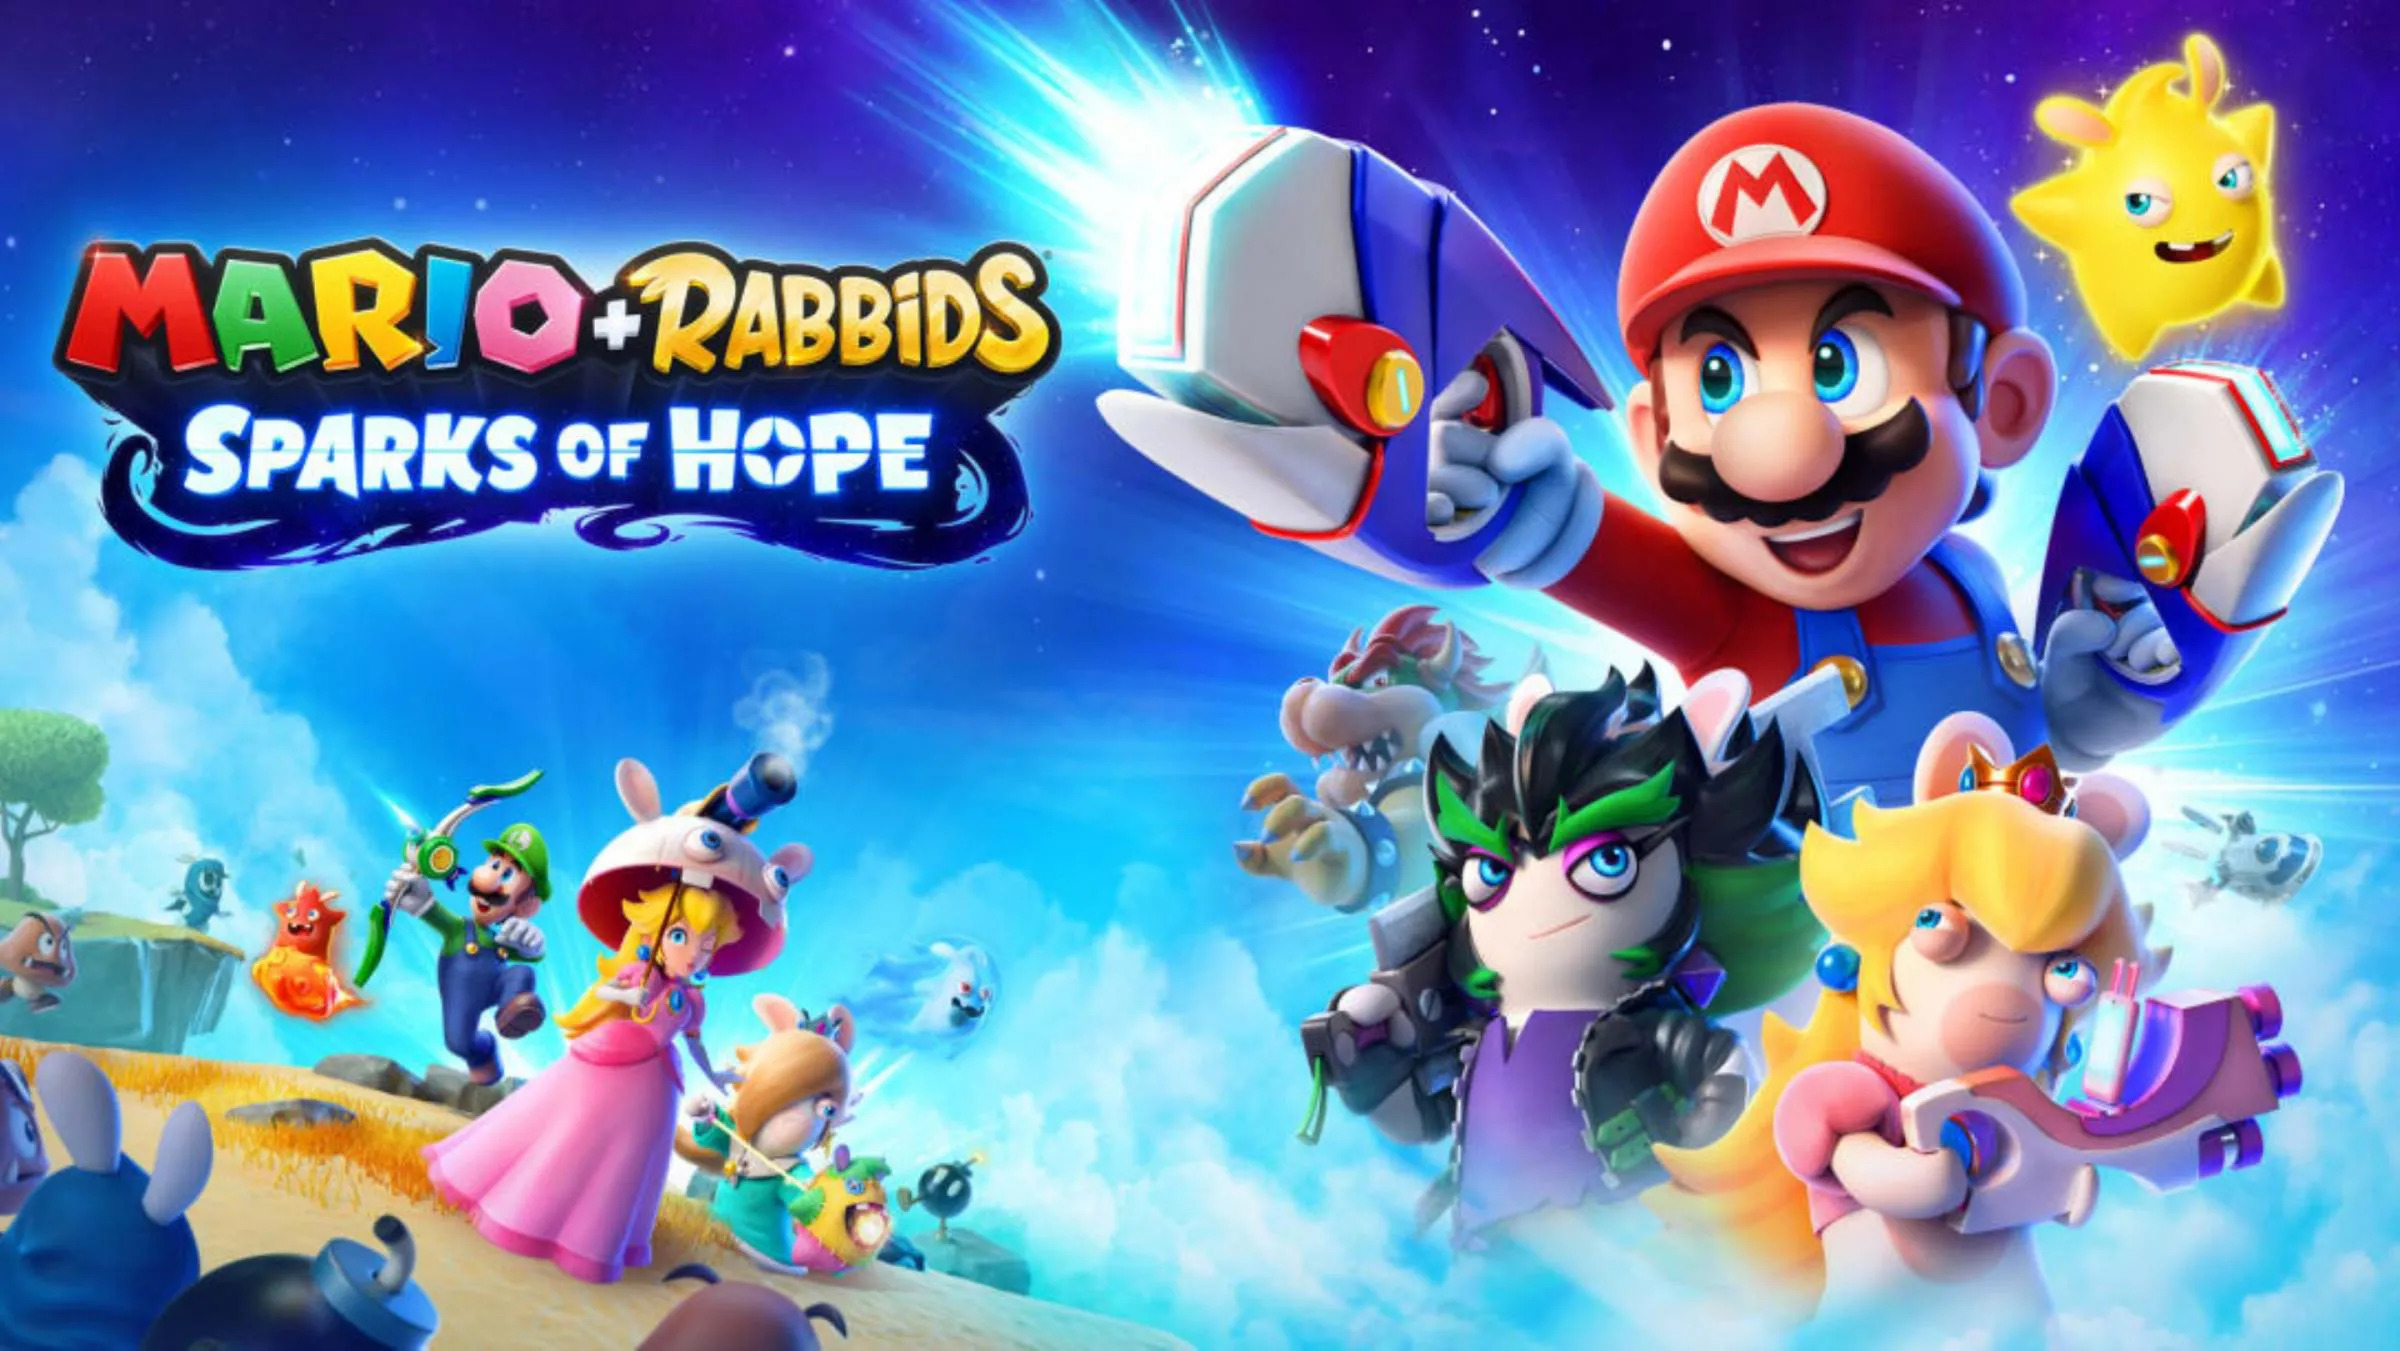 Mario & Rabbids: Sparks of Hope